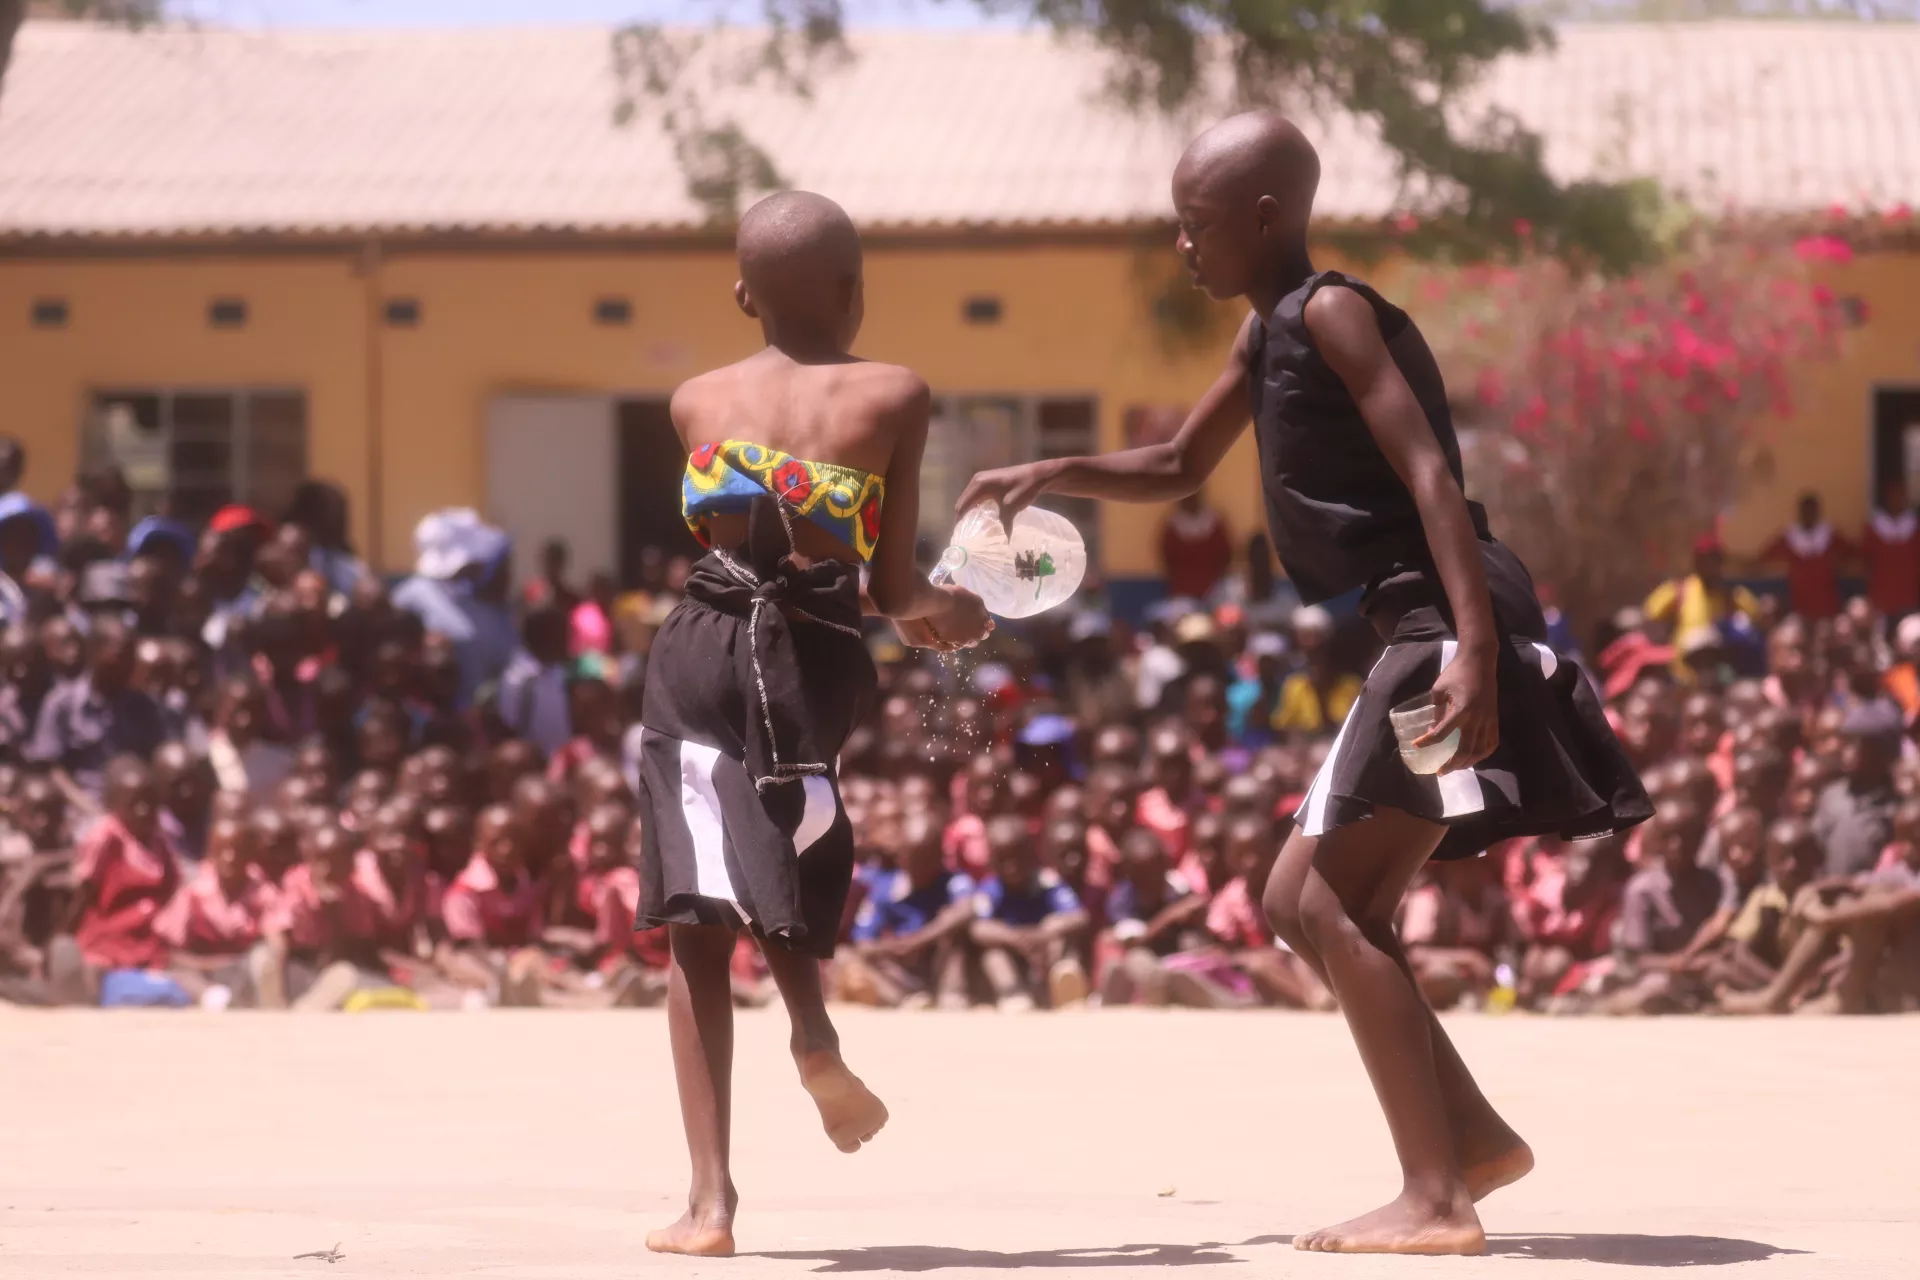 Art imitates life in this informative and educative play by Zedza Primary School students who encouraged people to follow proper hygiene practices